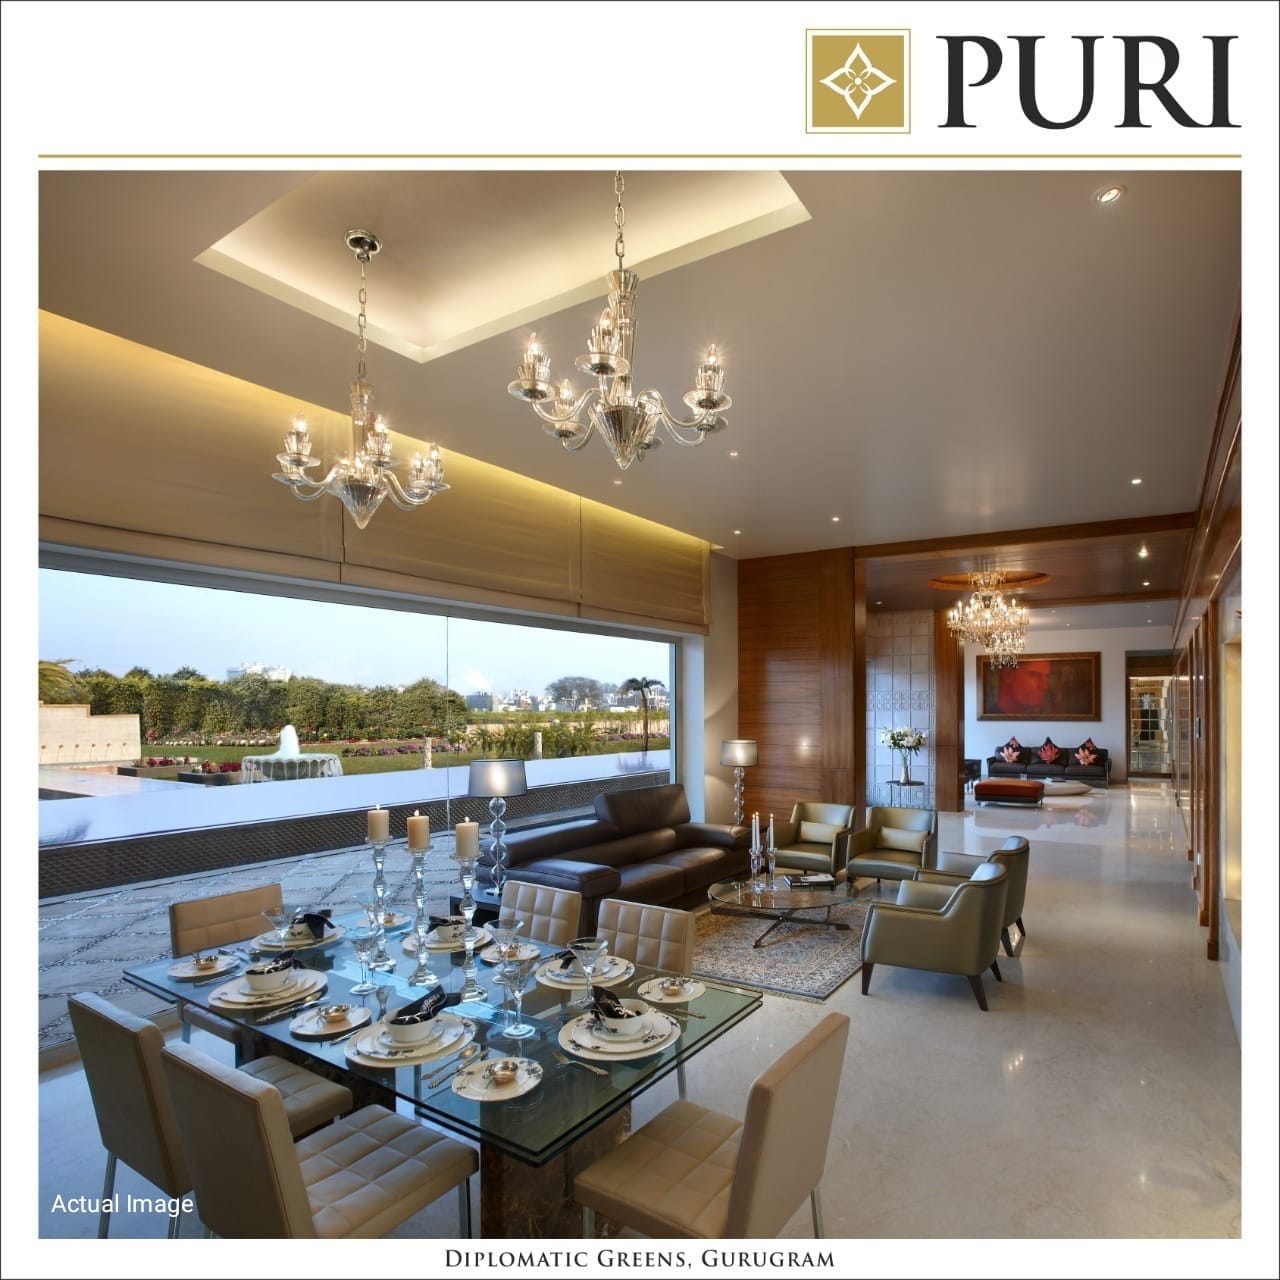 True luxury extends beyond the boundaries of your home at Puri Diplomatic Greens, Gurgaon Update